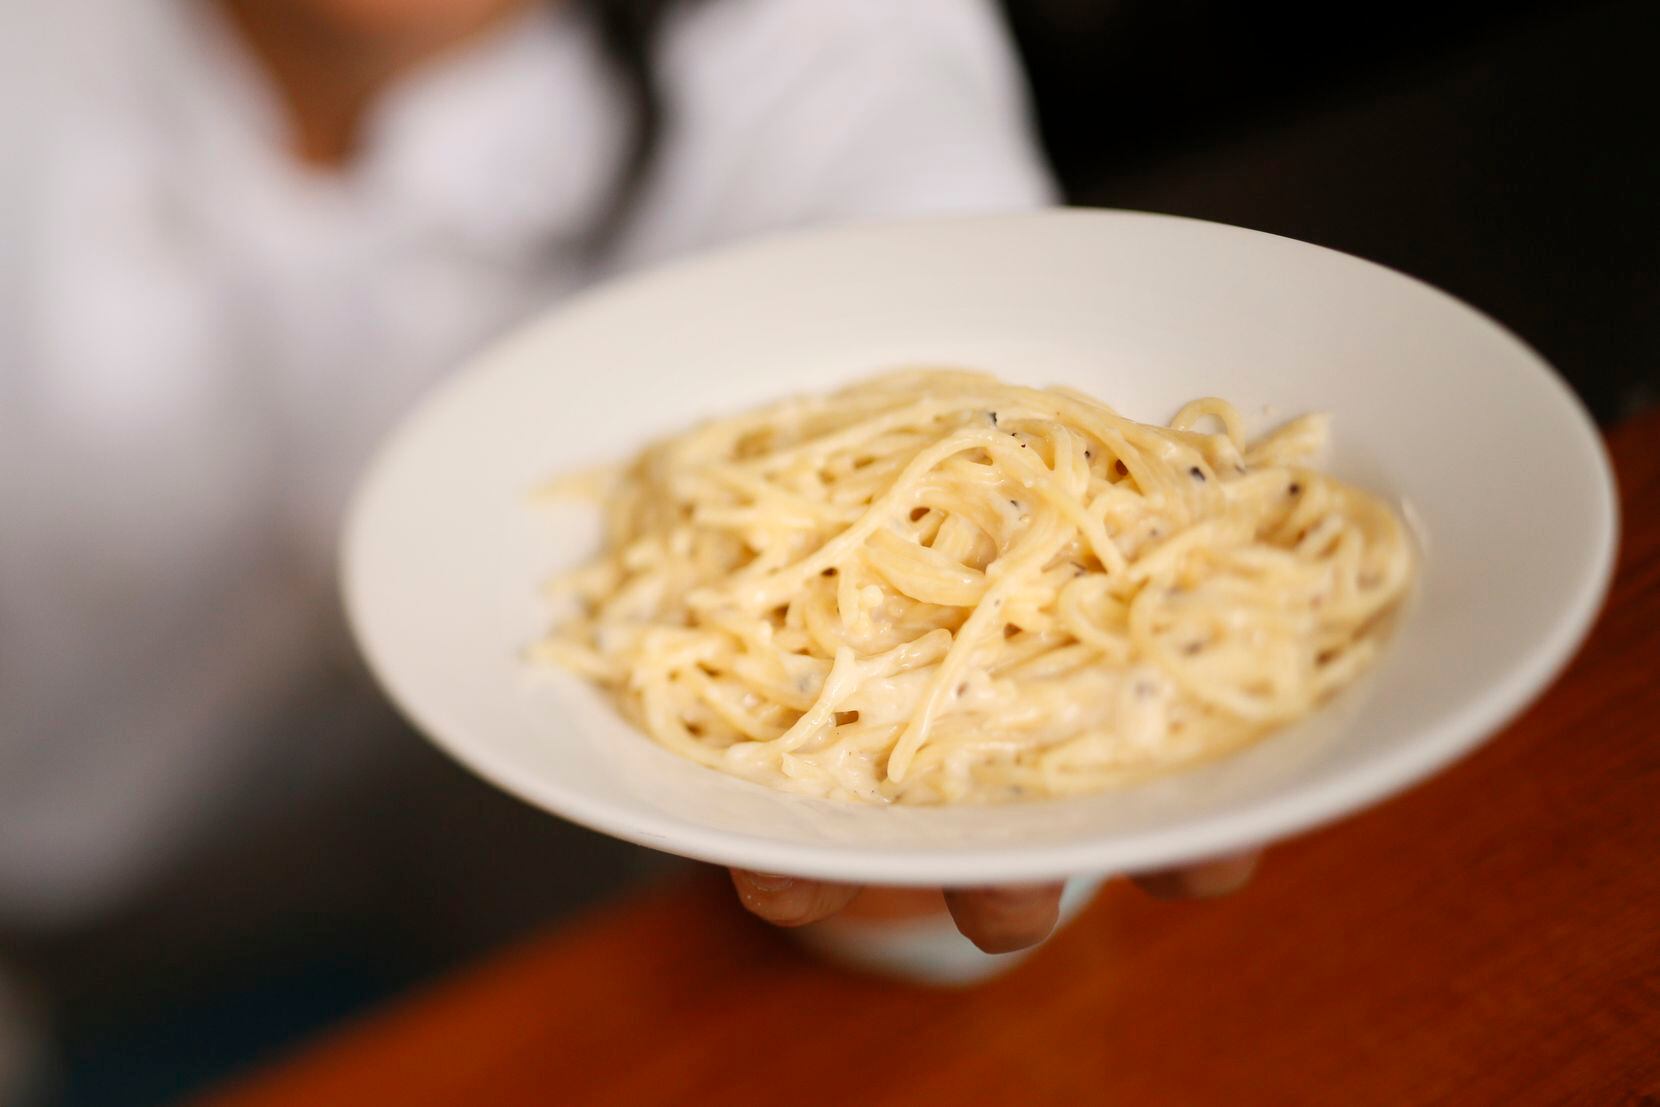 Sometimes, a supremely simple plate of pasta is the ultimate expression of love.